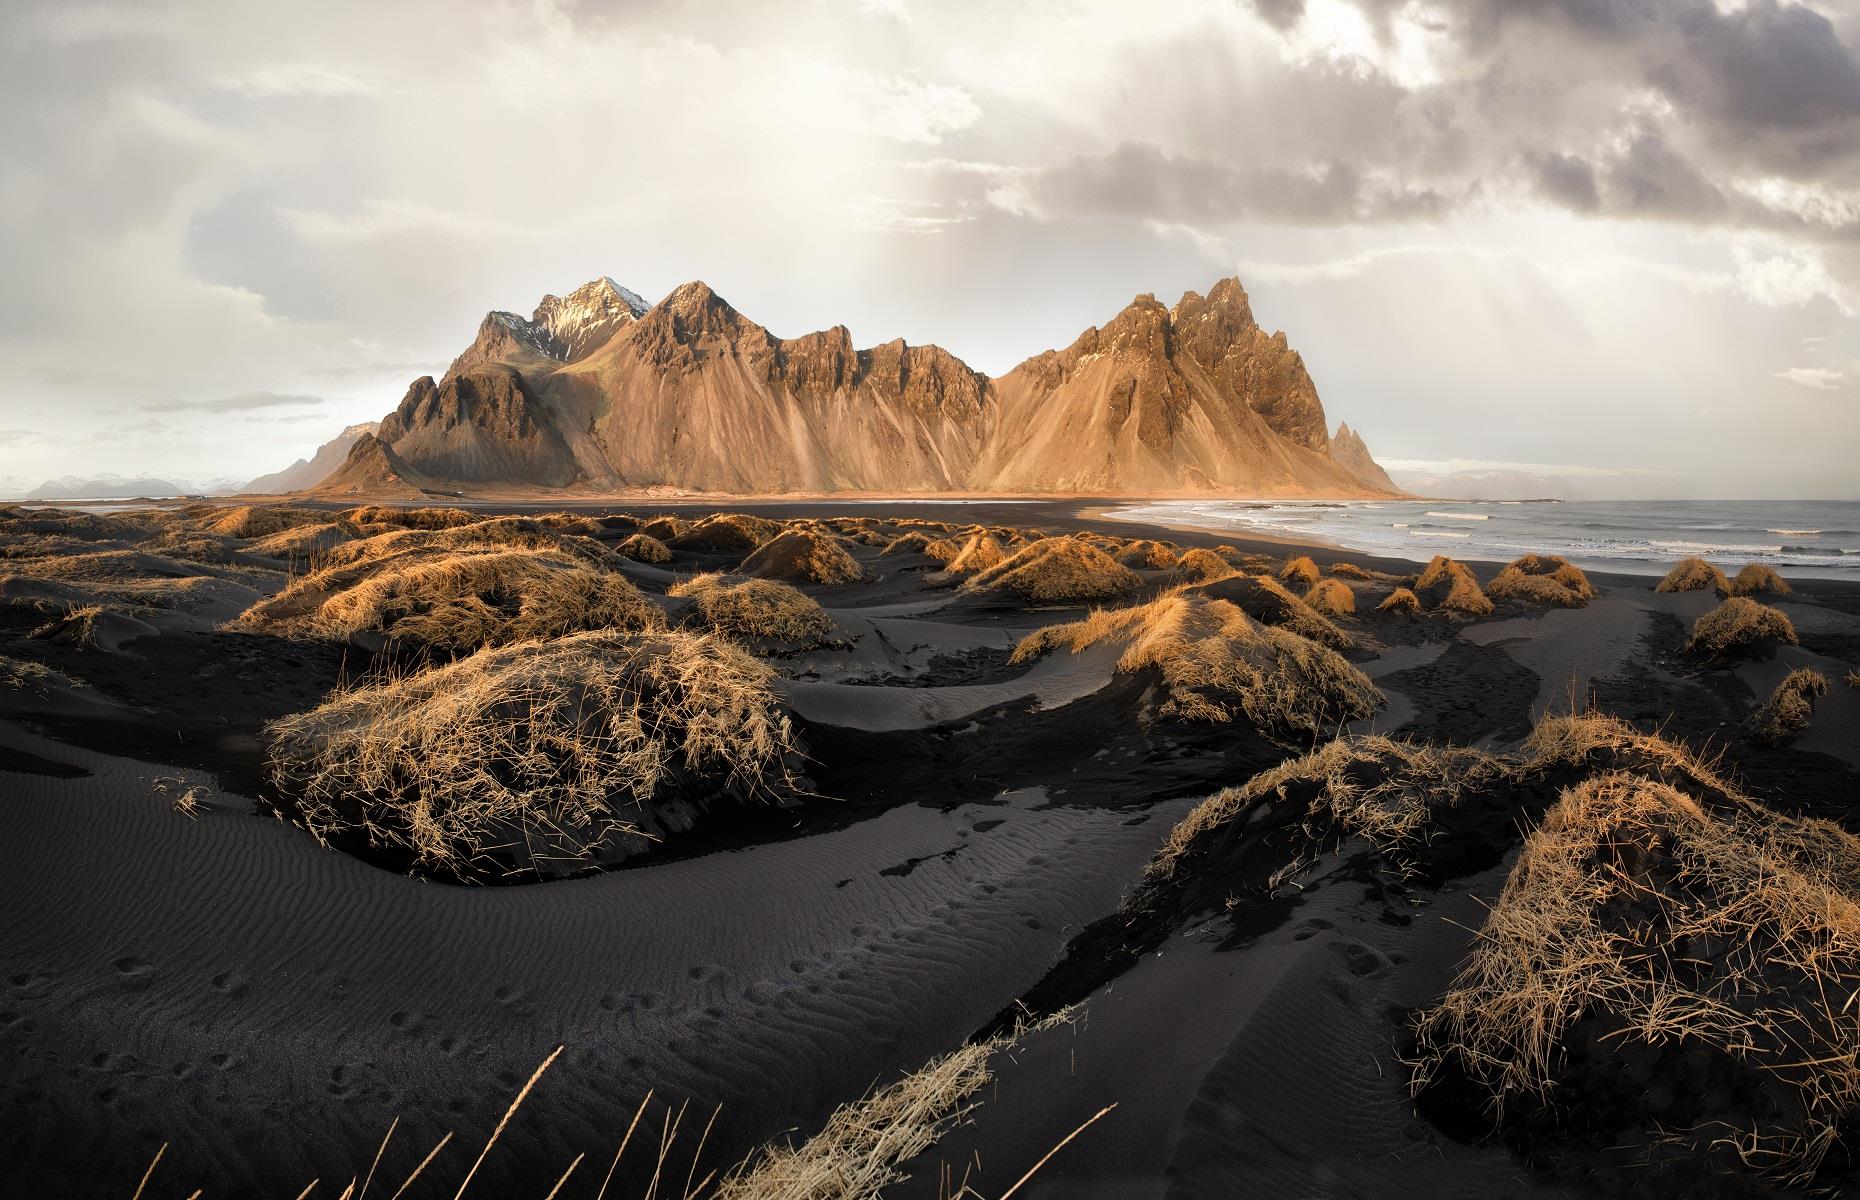 <p>When you think about Iceland, you might not picture sandy beaches, but this country boasts over 3,000 miles (4,970km) of coastline. On the southern shore, in Stokksnesvegur, you'll find Stokksnes Beach. Along with breathtaking mountain peaks, this hauntingly beautiful landscape is awash with black sand and stunning lagoons, making it an unrivaled setting for photography. Stokksnes peninsula also has a fascinating history and was a vital location for the British Army during the Second World War.</p>